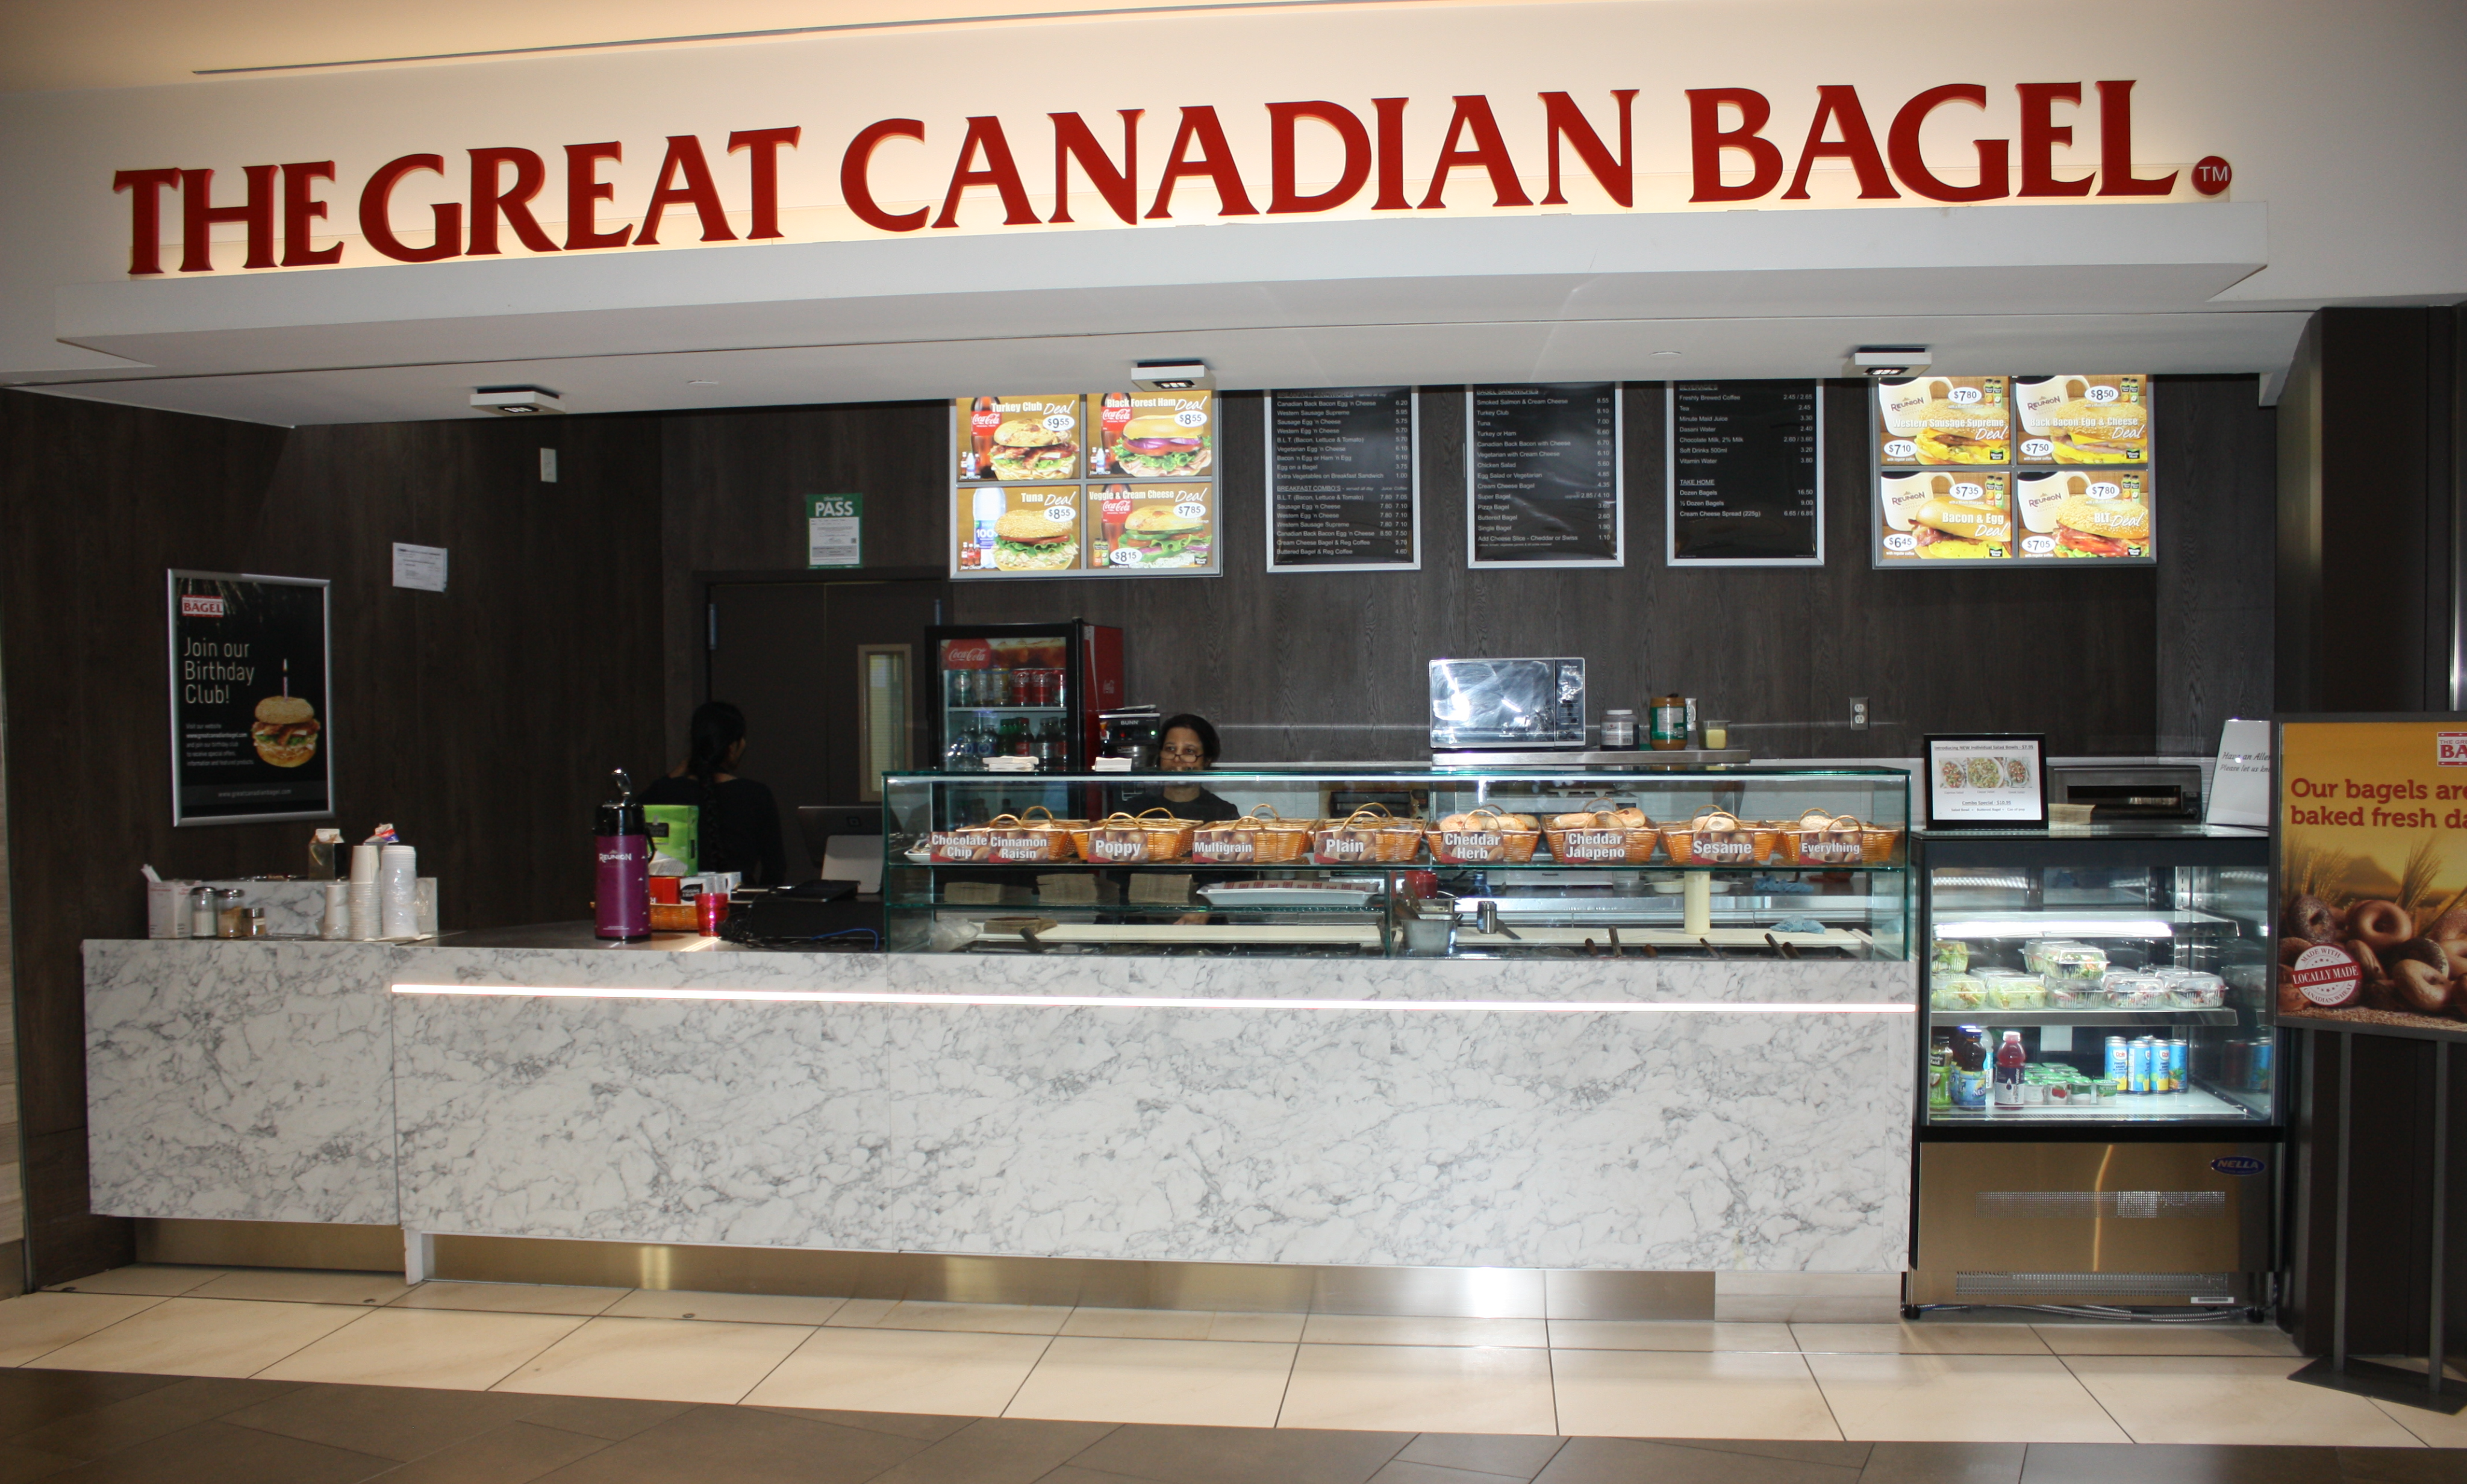 The Great Canadian Bagel